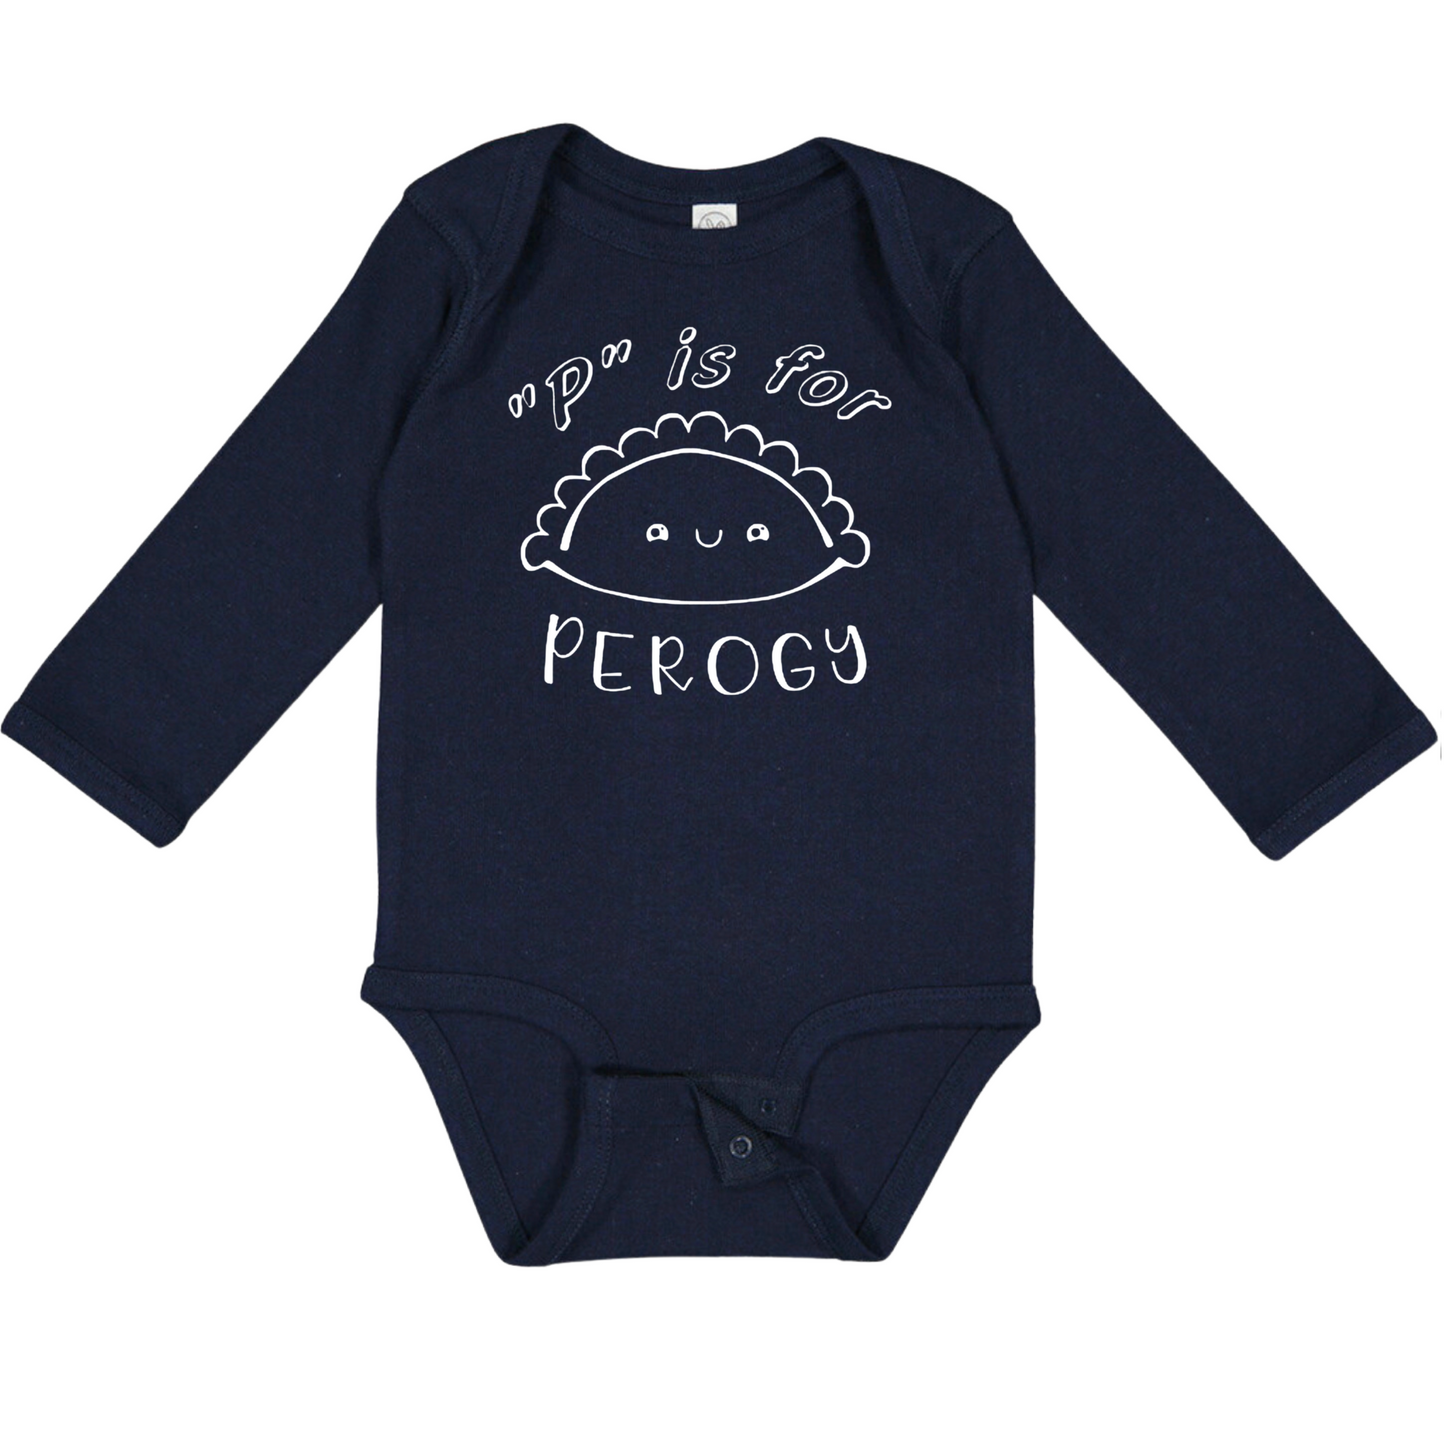 “P” is for PEROGY (White Font) - Long Sleeve Onesie